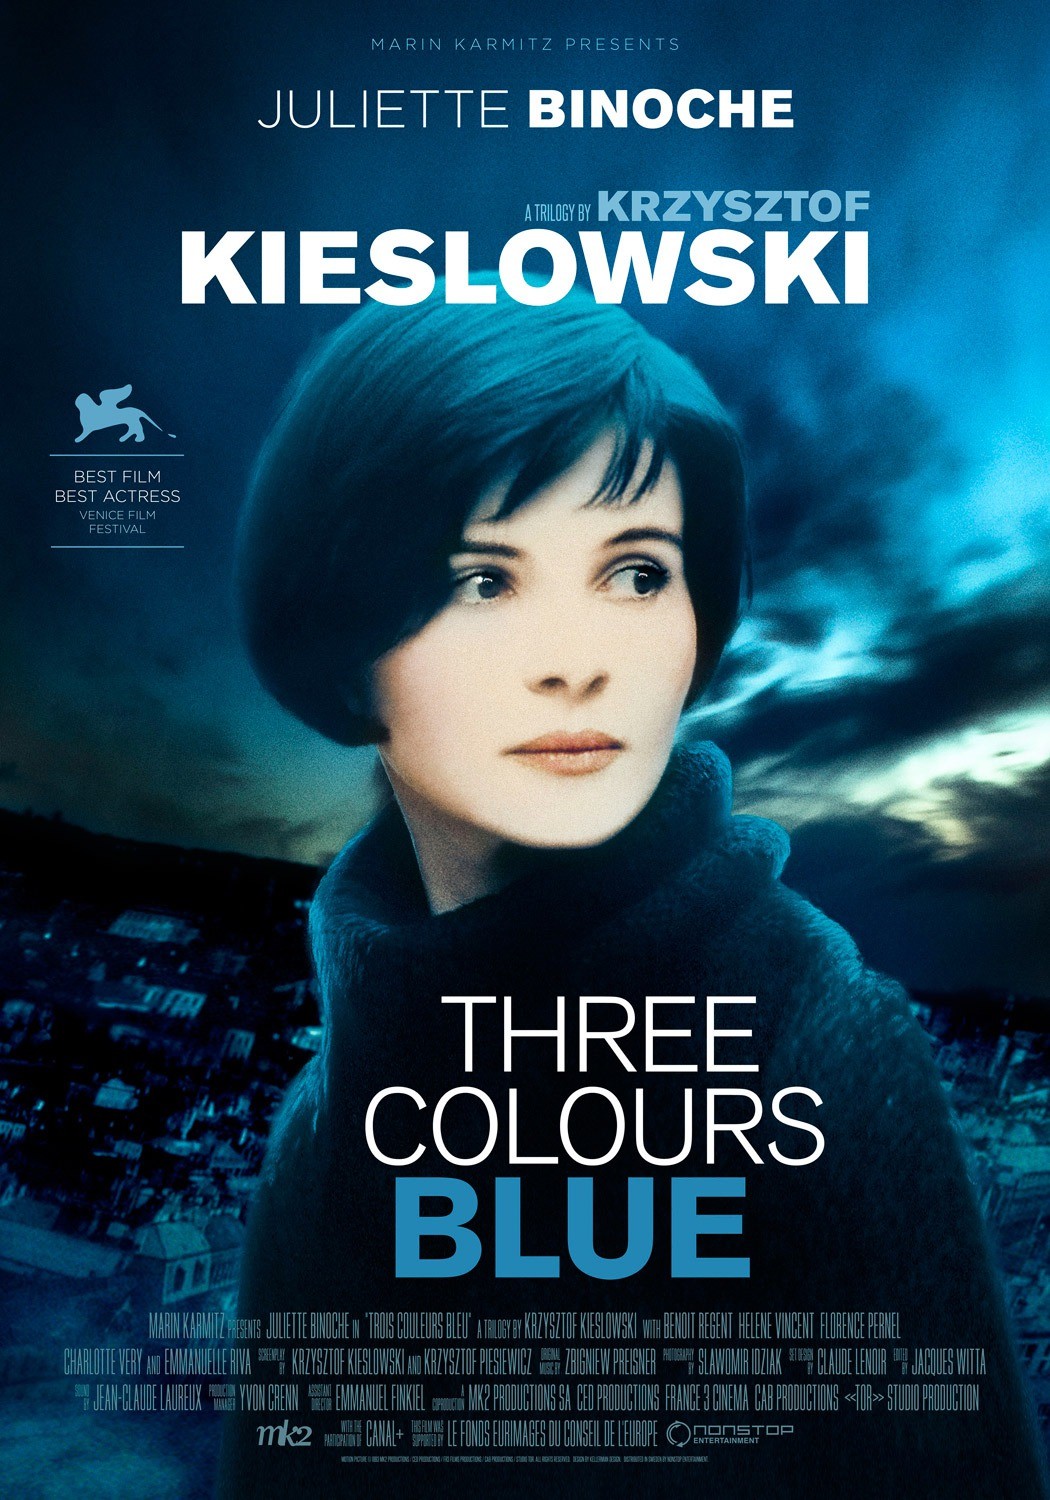 THREE COLOURS TRILOGY in 35mm